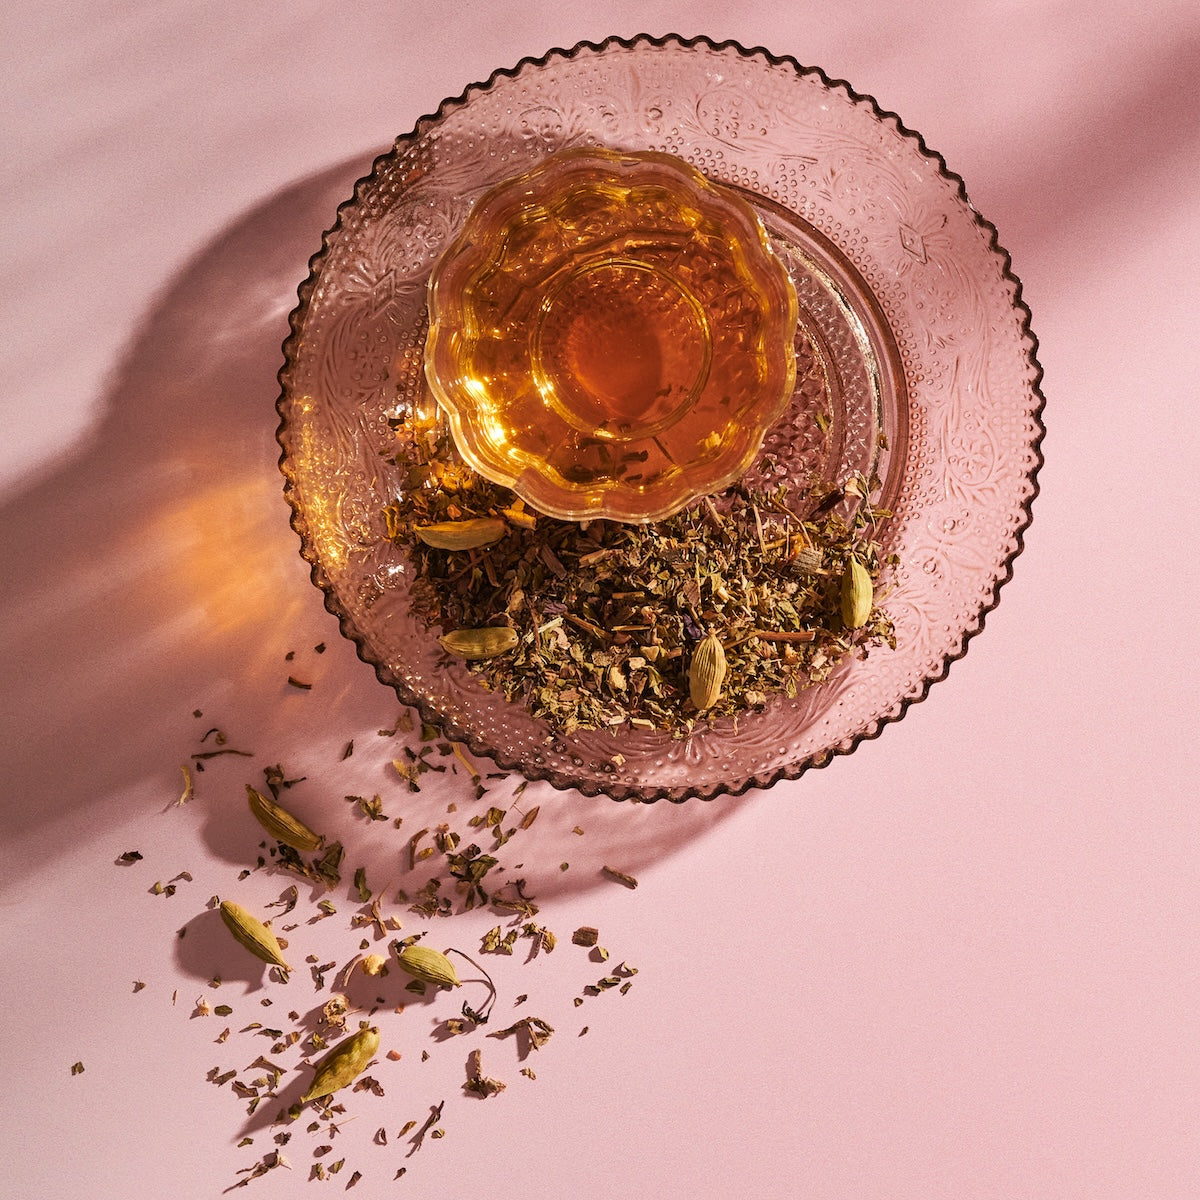 A glass teacup filled with The High Priestess: Wisdom Tea for Powerful Dreams &amp; Illuminated Insights by Magic Hour sits on a decorative saucer with loose tea leaves and cardamom pods scattered around. The setup is on a pink surface, with the caffeine-free tea casting a warm amber hue against the saucer&#39;s intricate pattern.